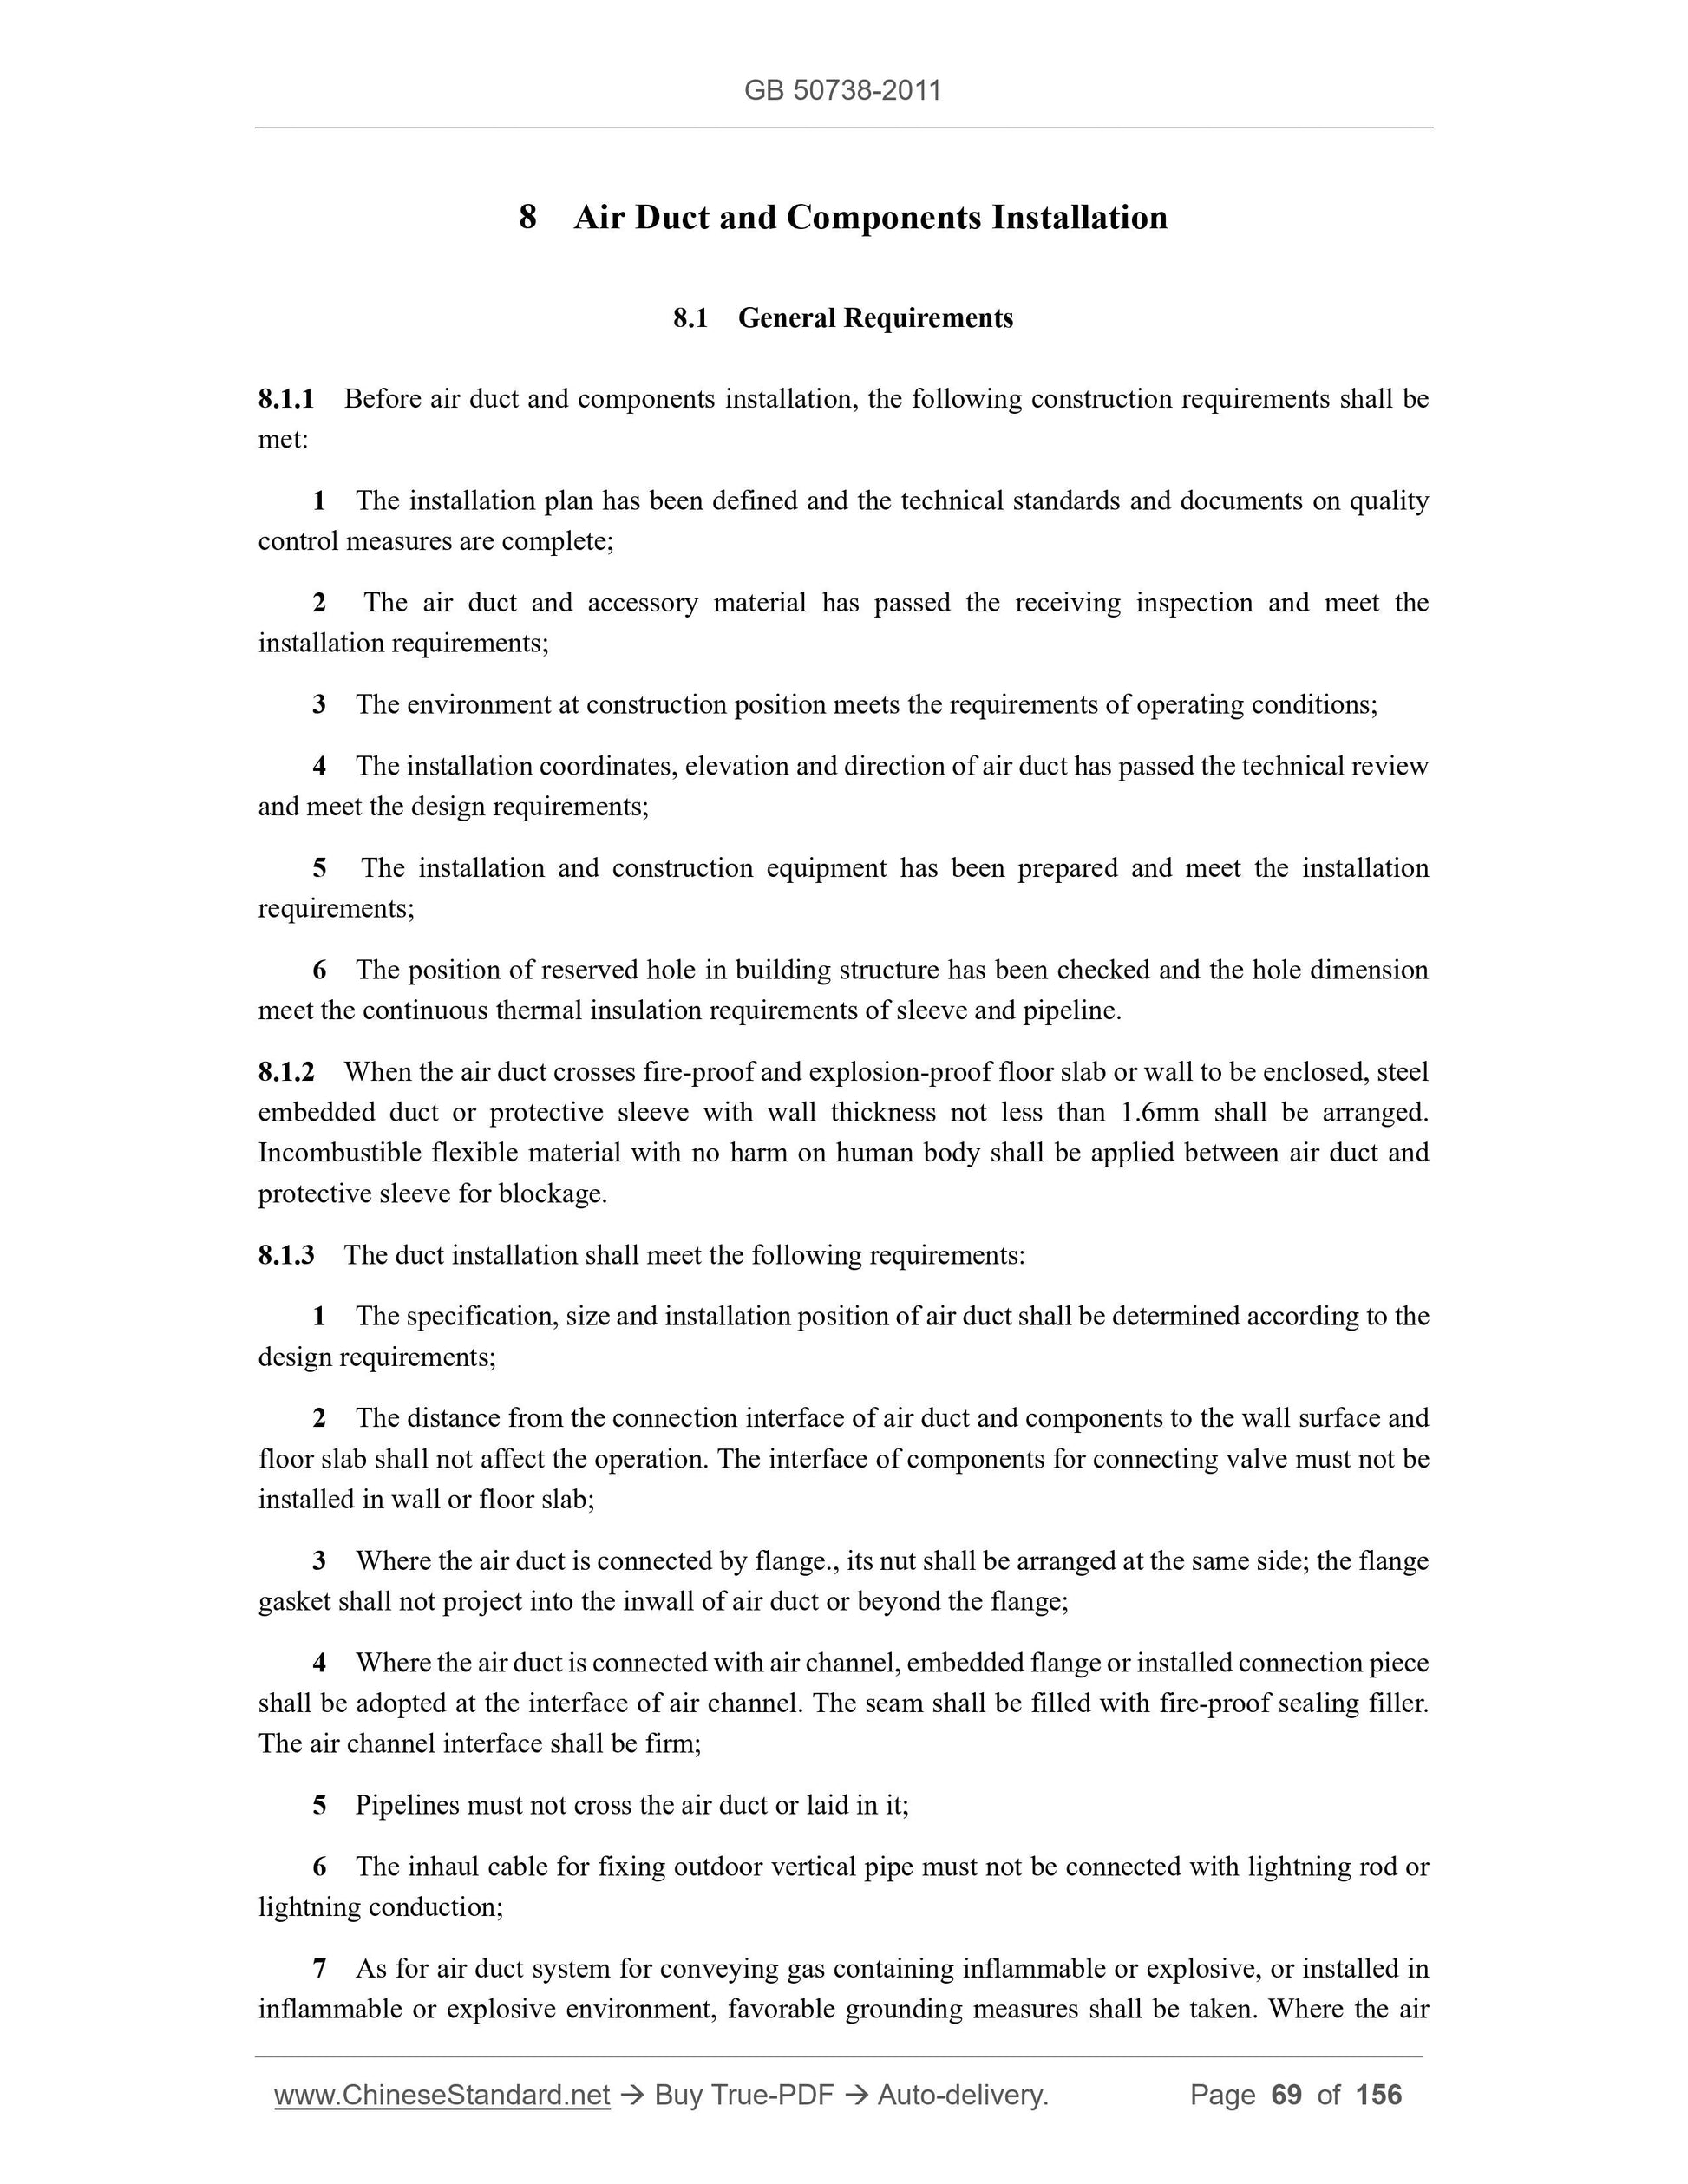 GB 50738-2011 Page 12